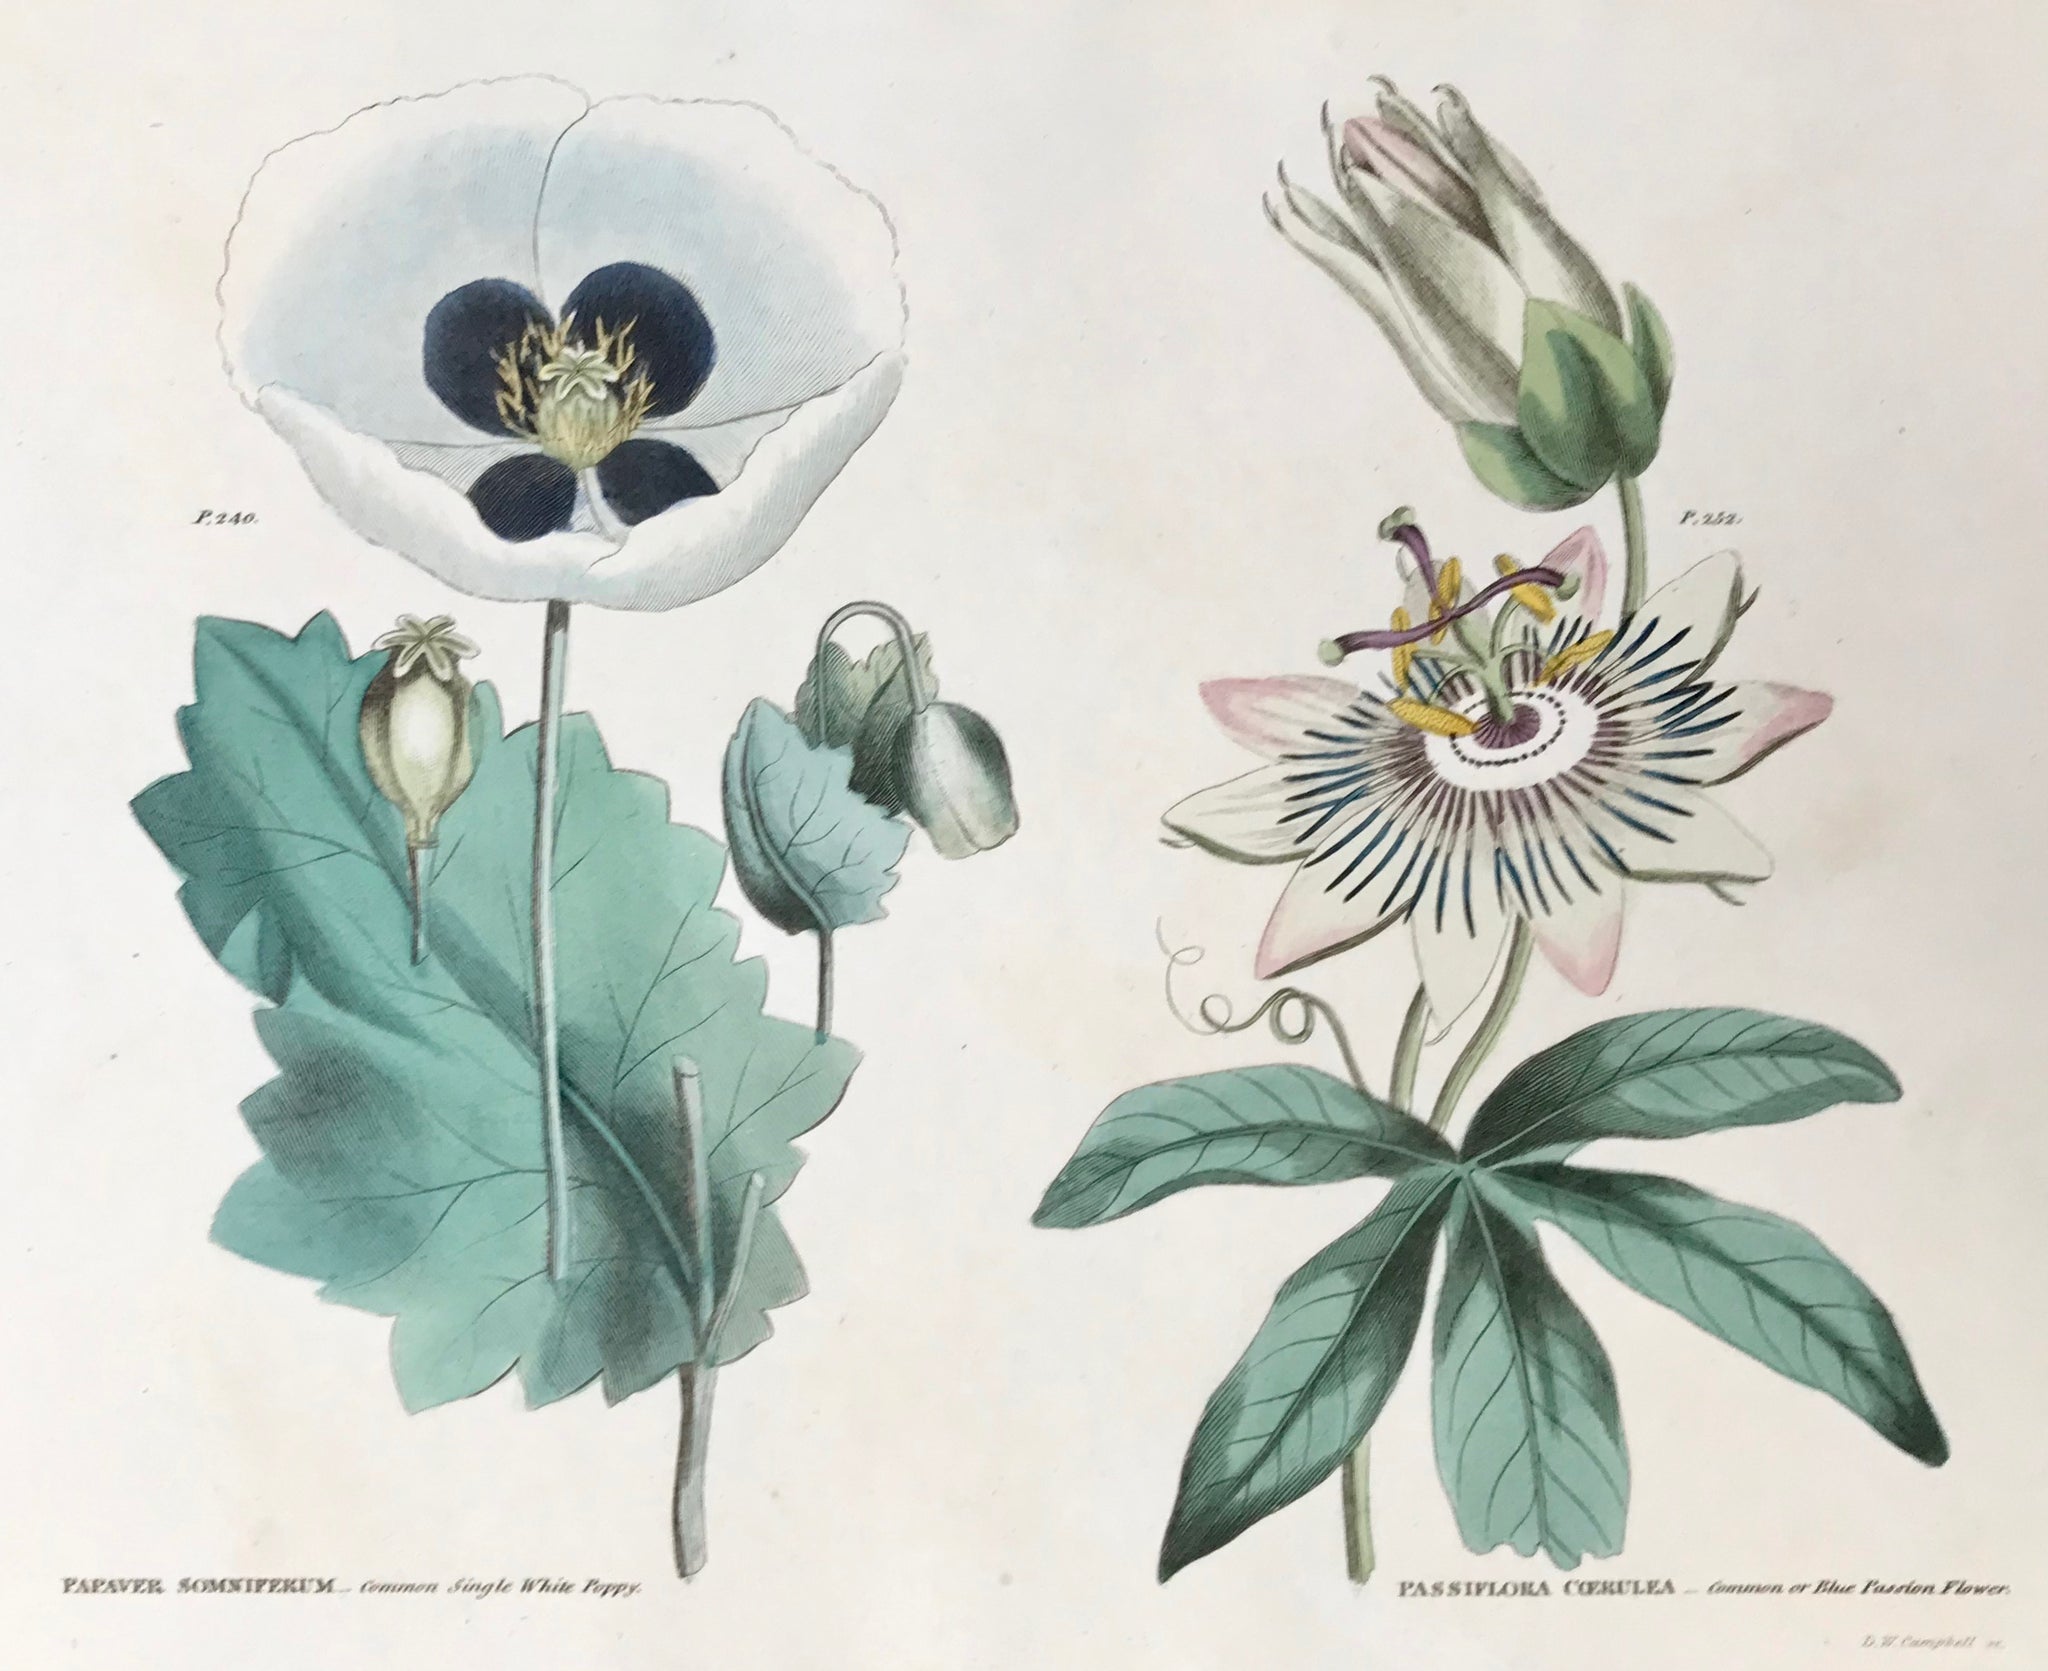    Left side: Papaver Somniferum Common Single White Poppy. Right side: Passiflora Coerulea Common or Blue Passion Flower.   Antique Botanical Prints from  "The Universal Herbal" by Thomas Green.  The complete title of this accurately and absolutely delightfully hand-colored work is: "The Universal Herbal", or Botanical, Medical, and Agricultural Dictionary, containing an Account of all the known Plants in the World arranged according to the Linnean System, specifying the Uses to which they are...